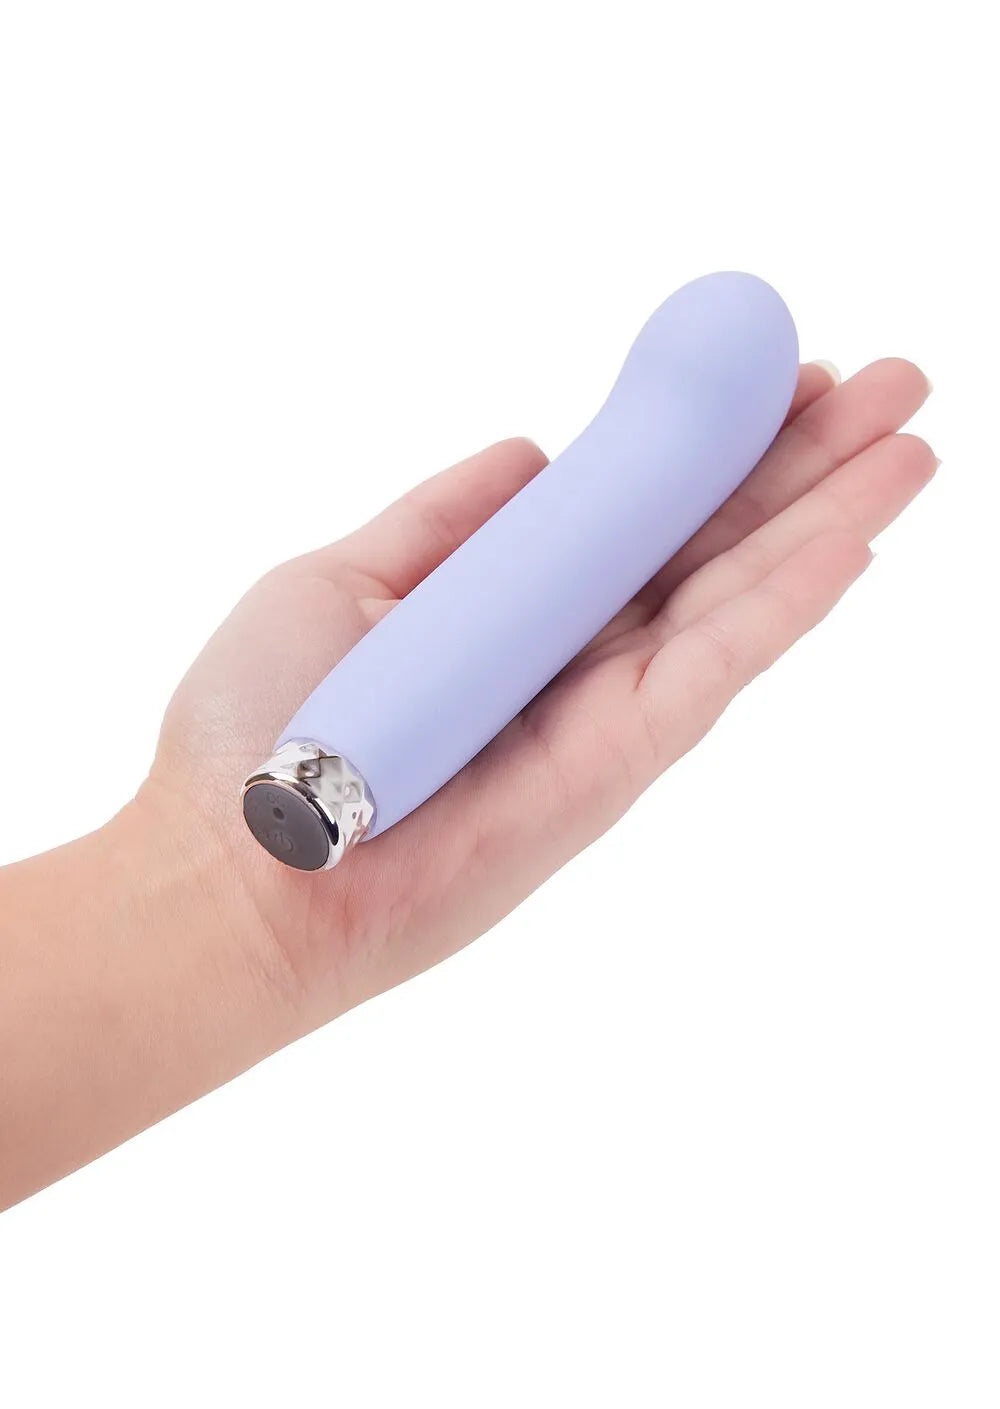 5 Inch G Spot Vibrator From Ann Summers, Image 1